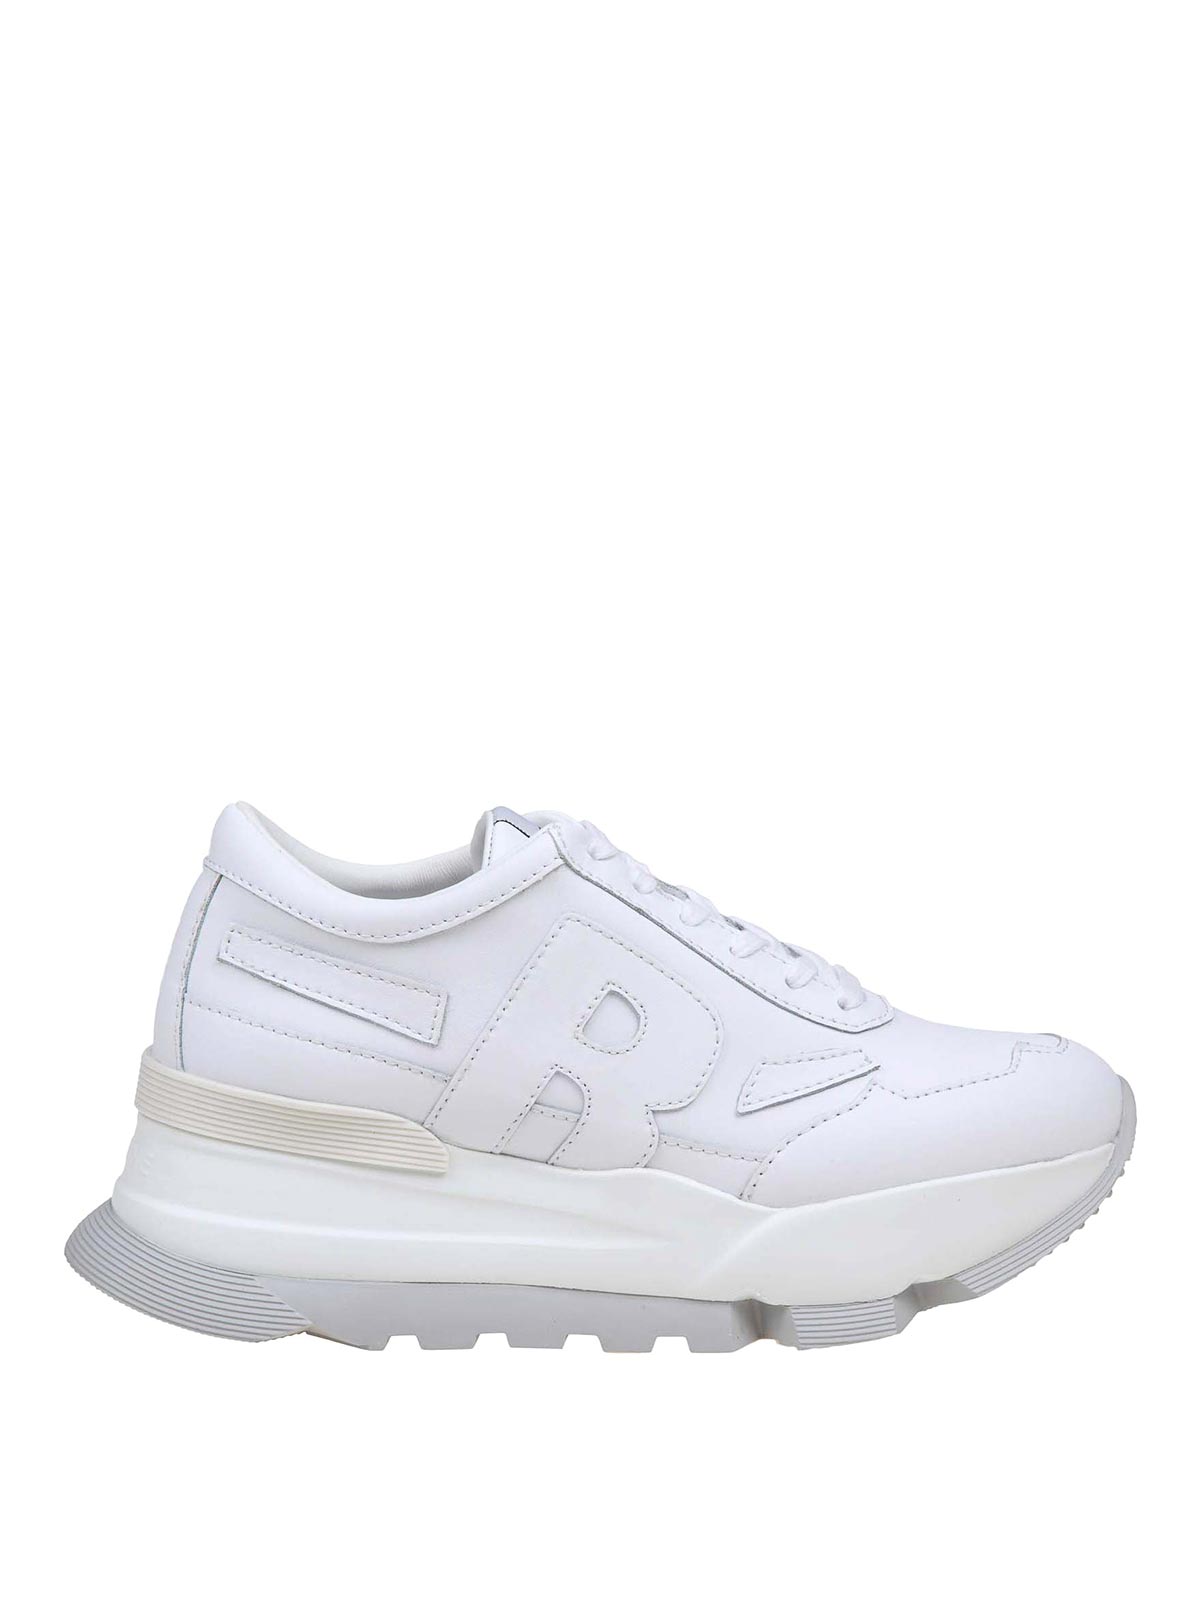 Shop Ruco Line Leather Sneakers In Blanco